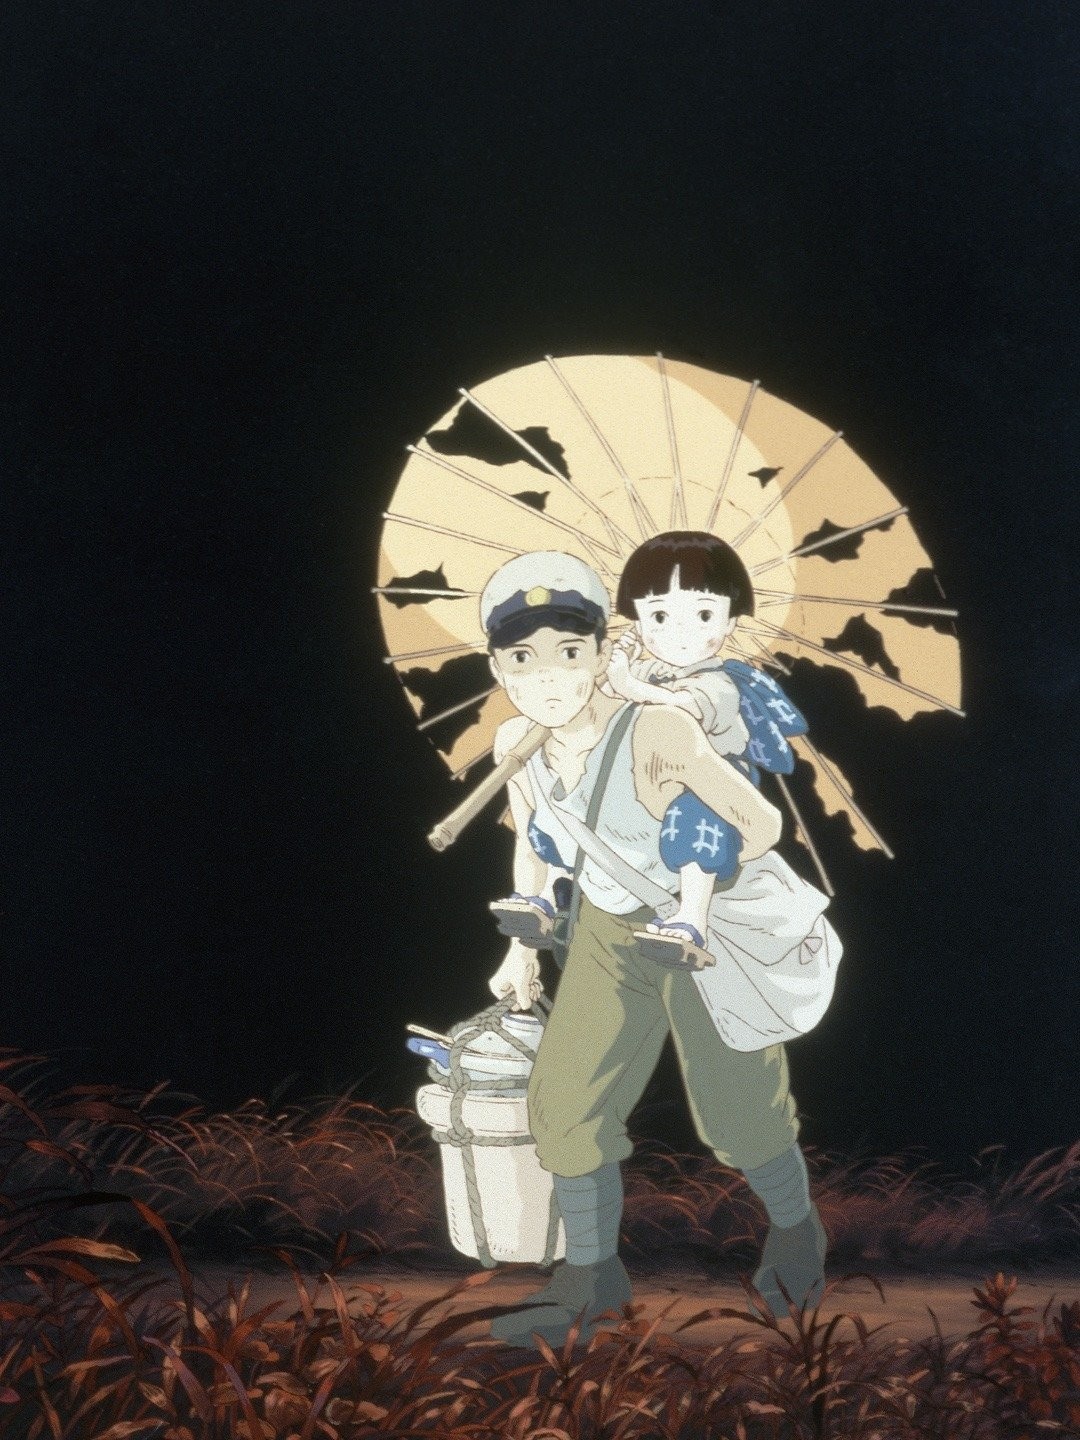 Umeboshi plums and the Grave of the fireflies - Review